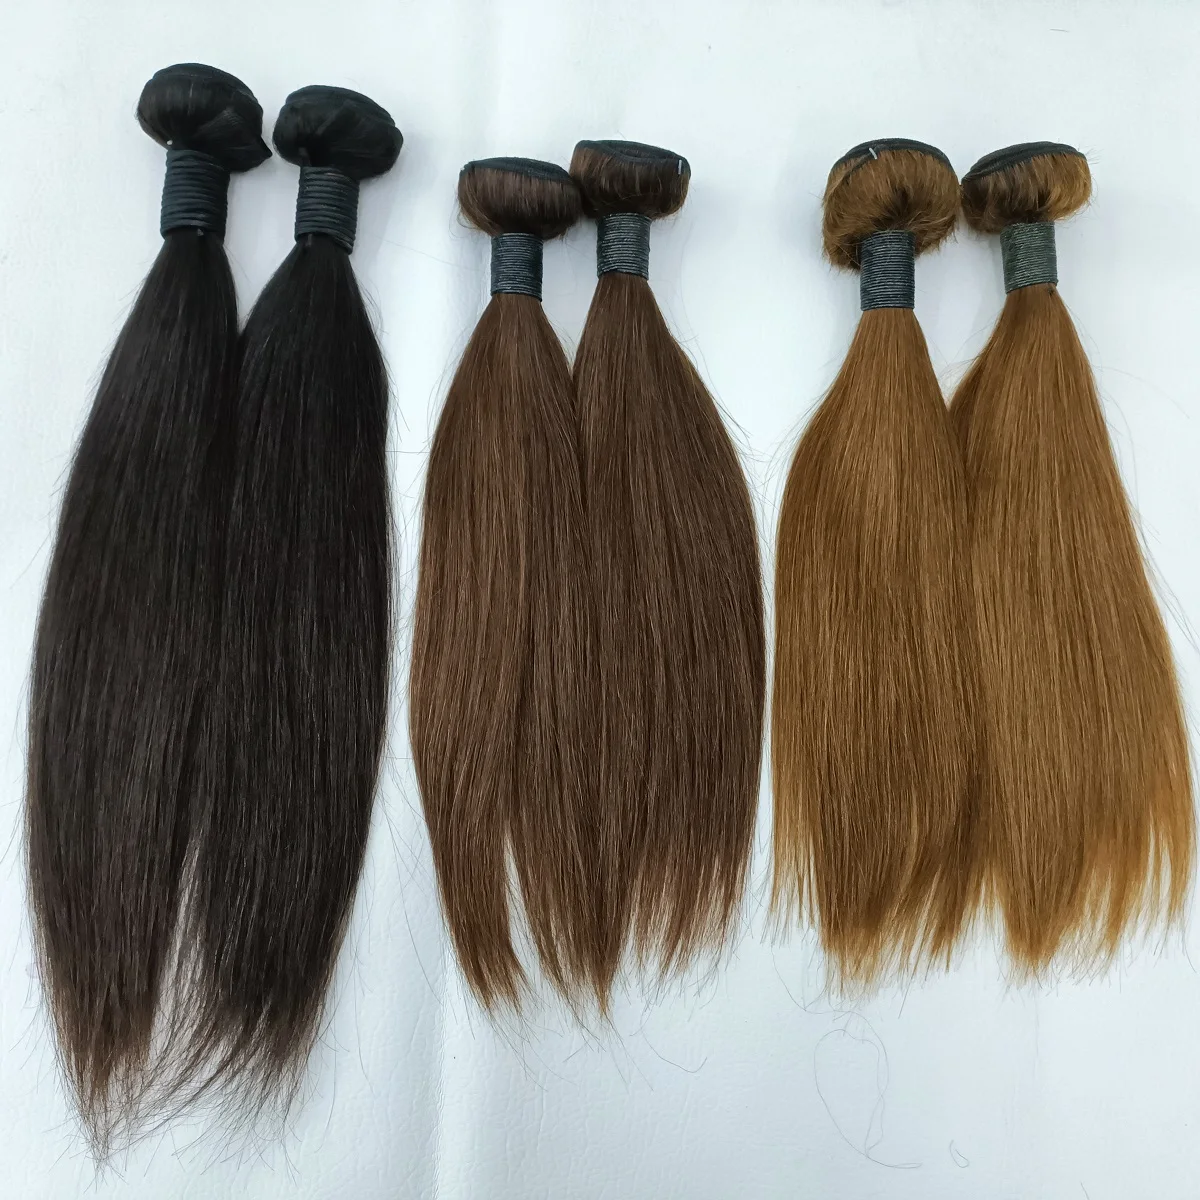 

Letsfly Top Quality Light Brown Hair 10A Remy Hair Extensions, Cuticle Aligned Human Virgin Hair Weave Free Shipping